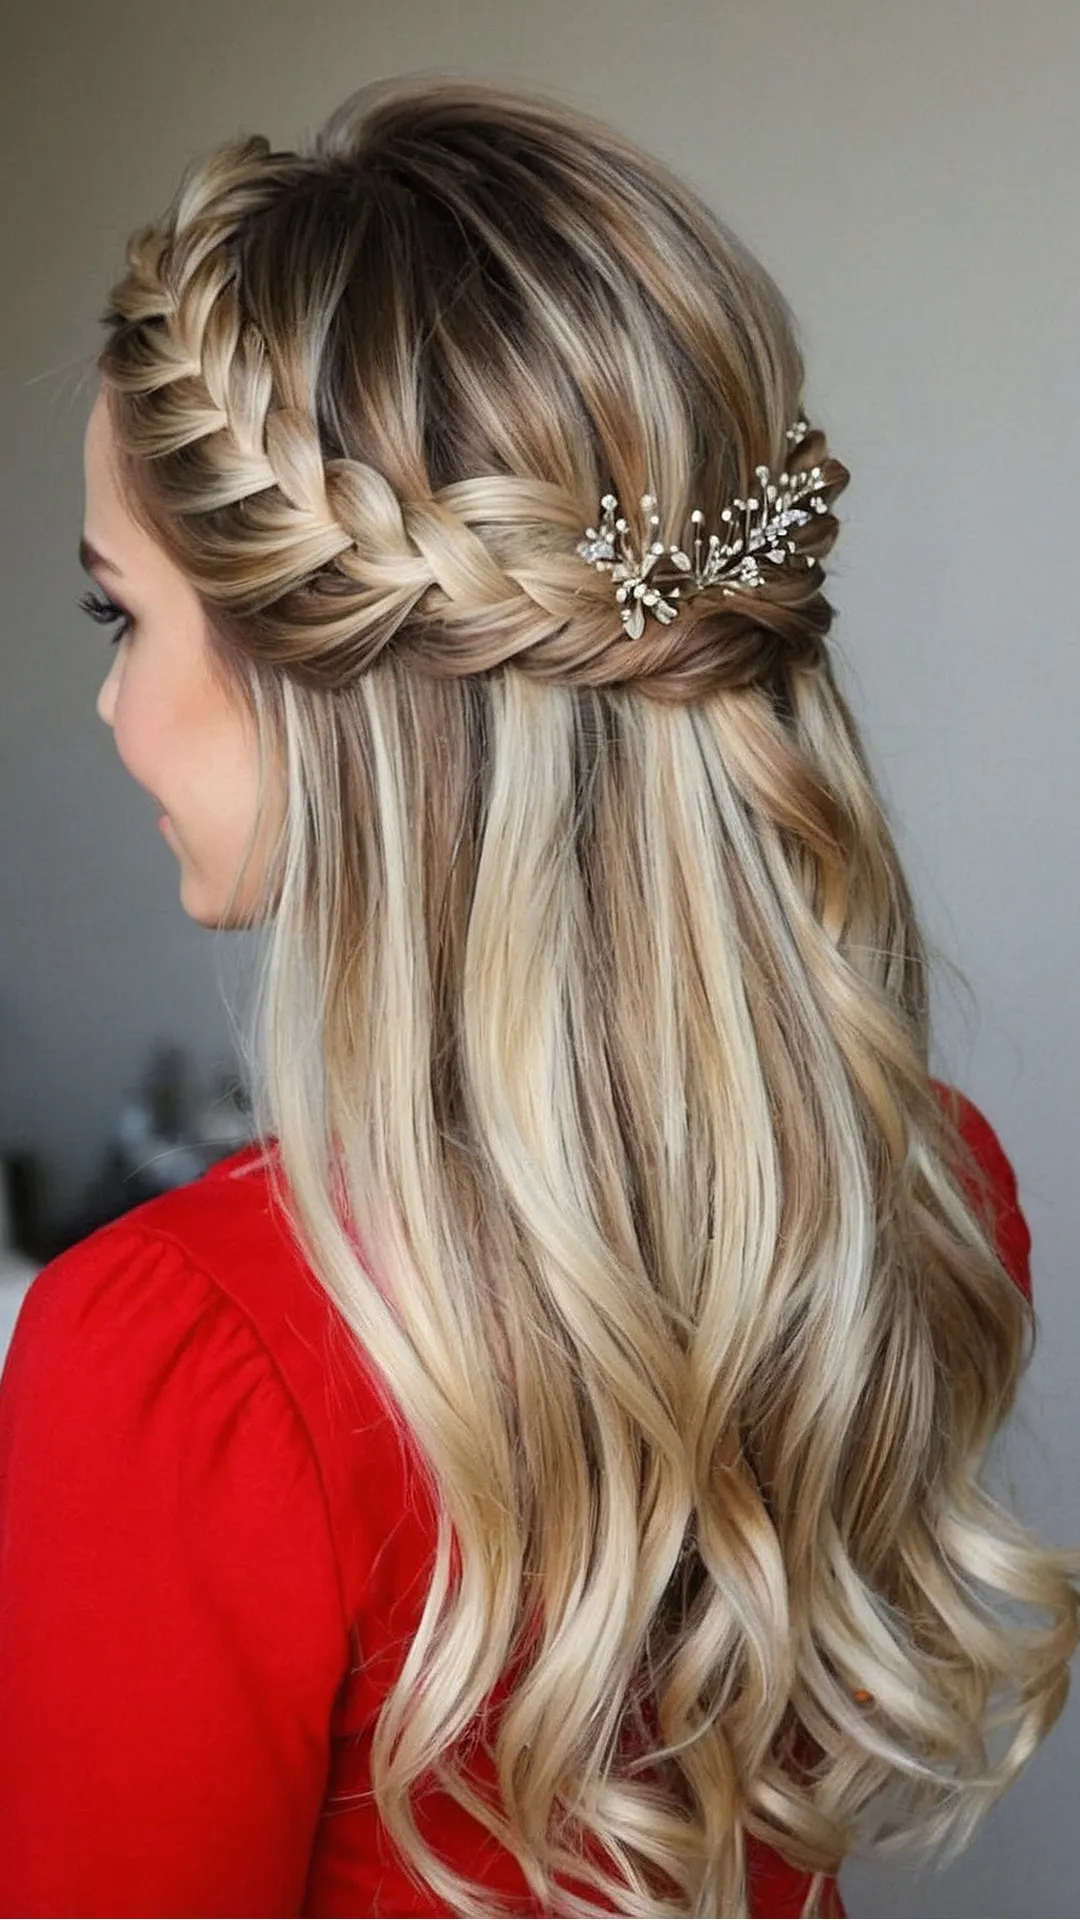 Adorable Accessories for Prom Hair Perfection